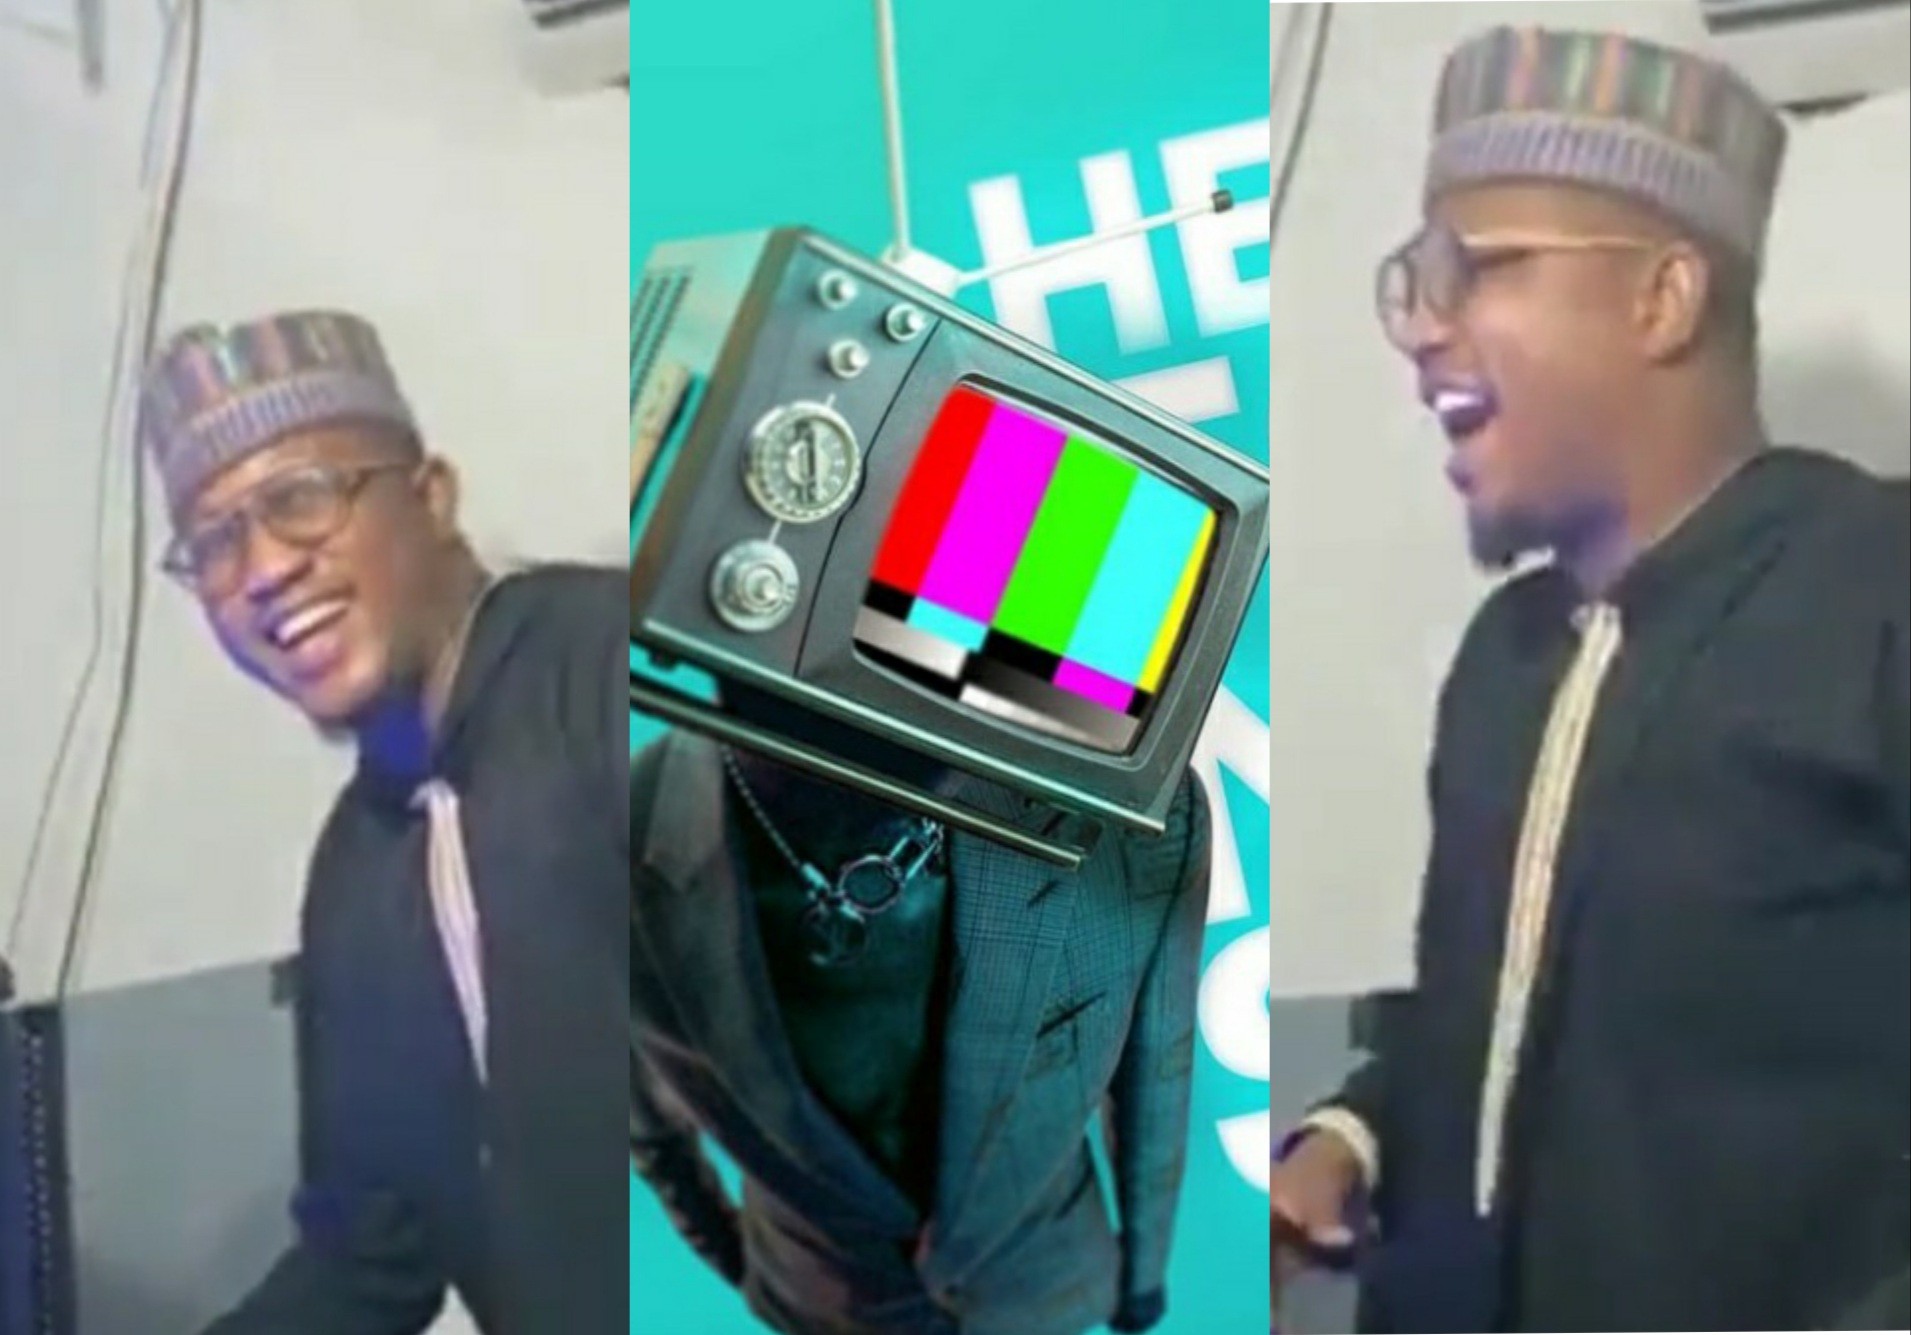 Watch The Excitement On The Faces Of The 3Music TV Team As The Station Went Live